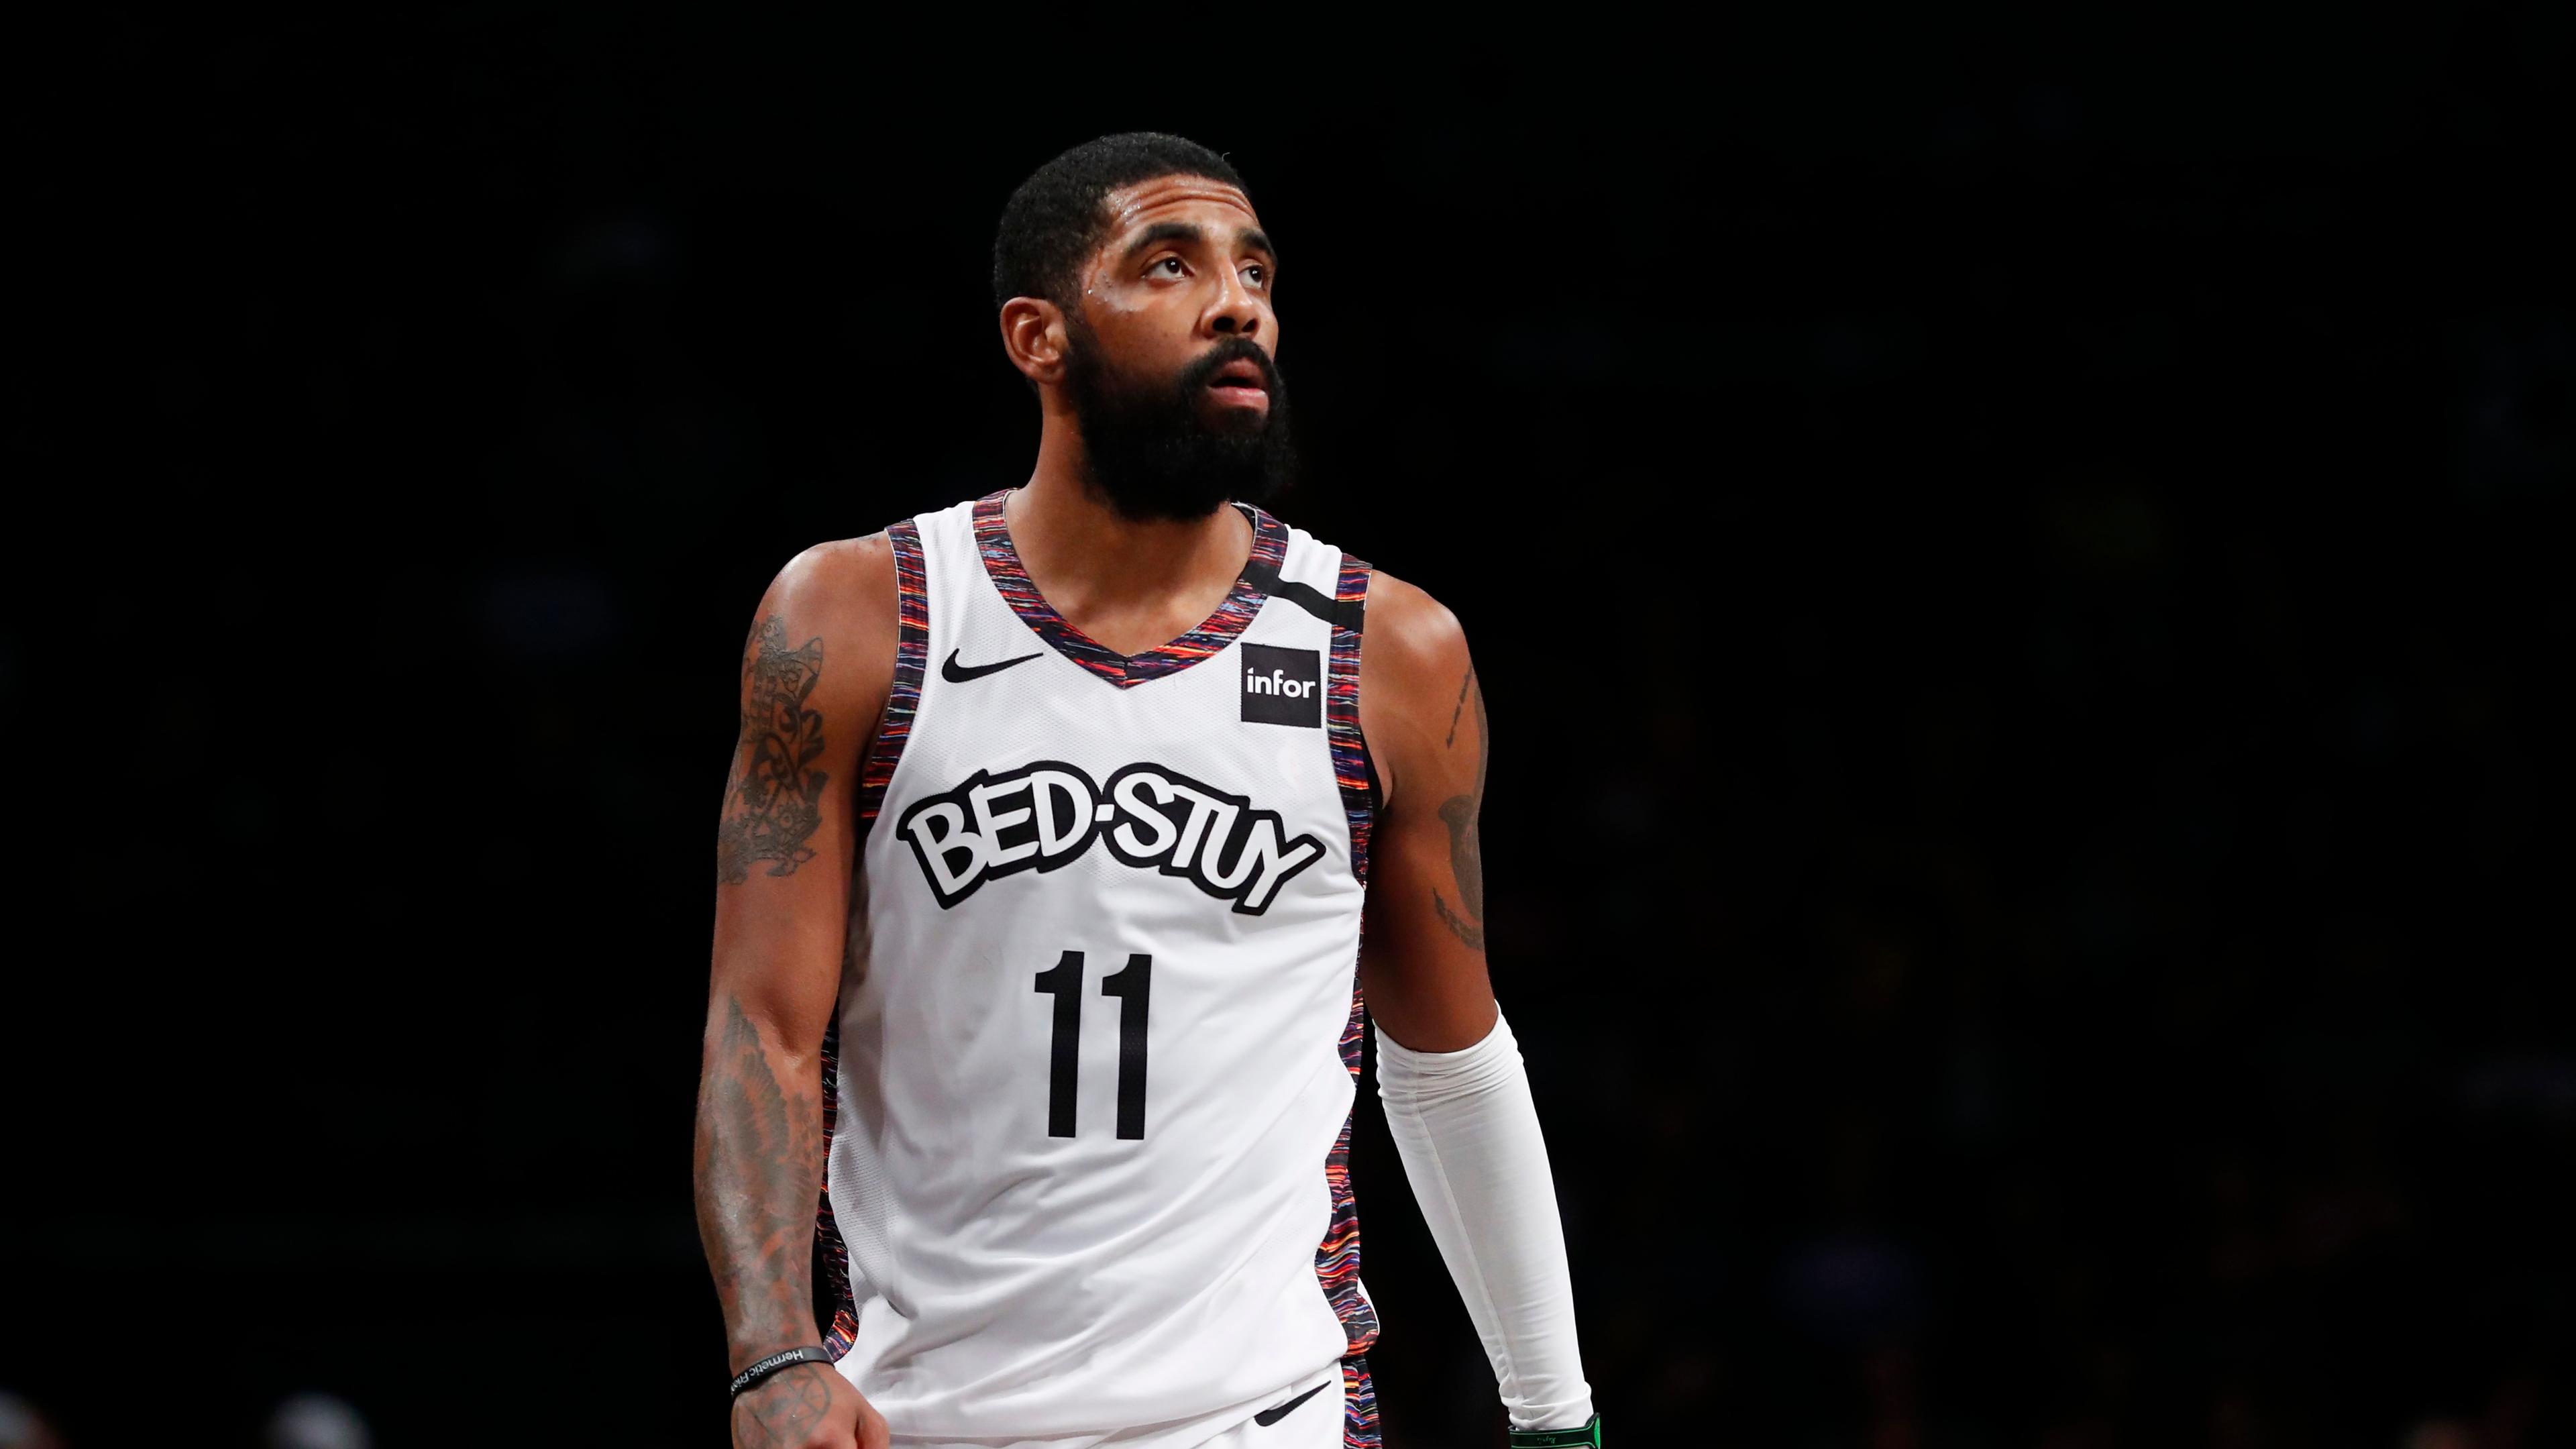 Kyrie Irving wearing white Bedstuy jersey / Noah K. Murray/USA TODAY